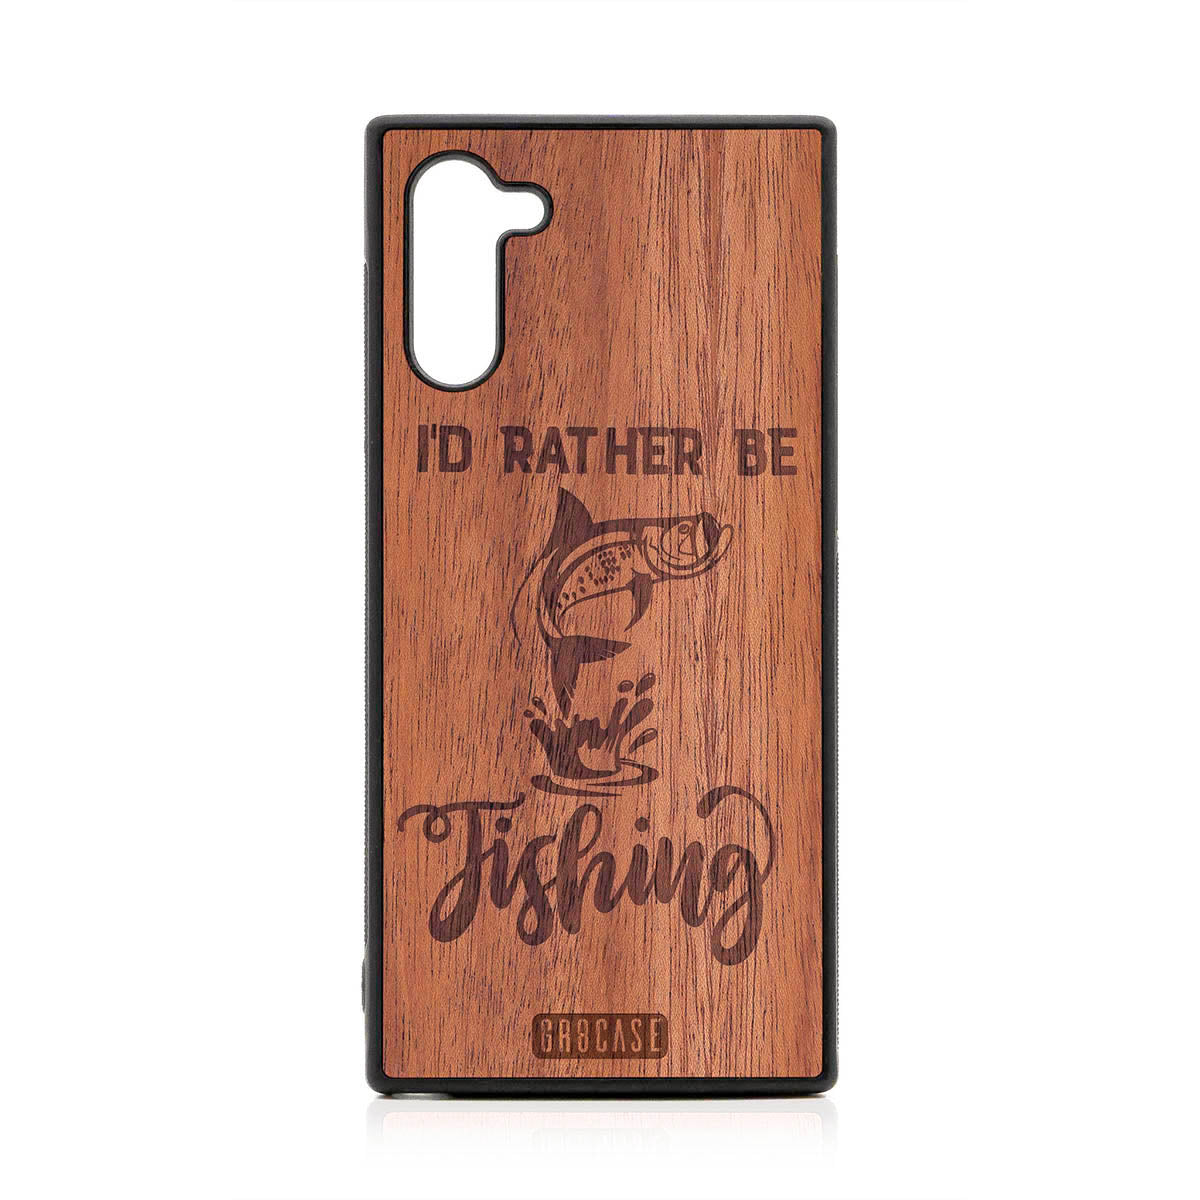 I'D Rather Be Fishing Design Wood Case For Samsung Galaxy Note 10